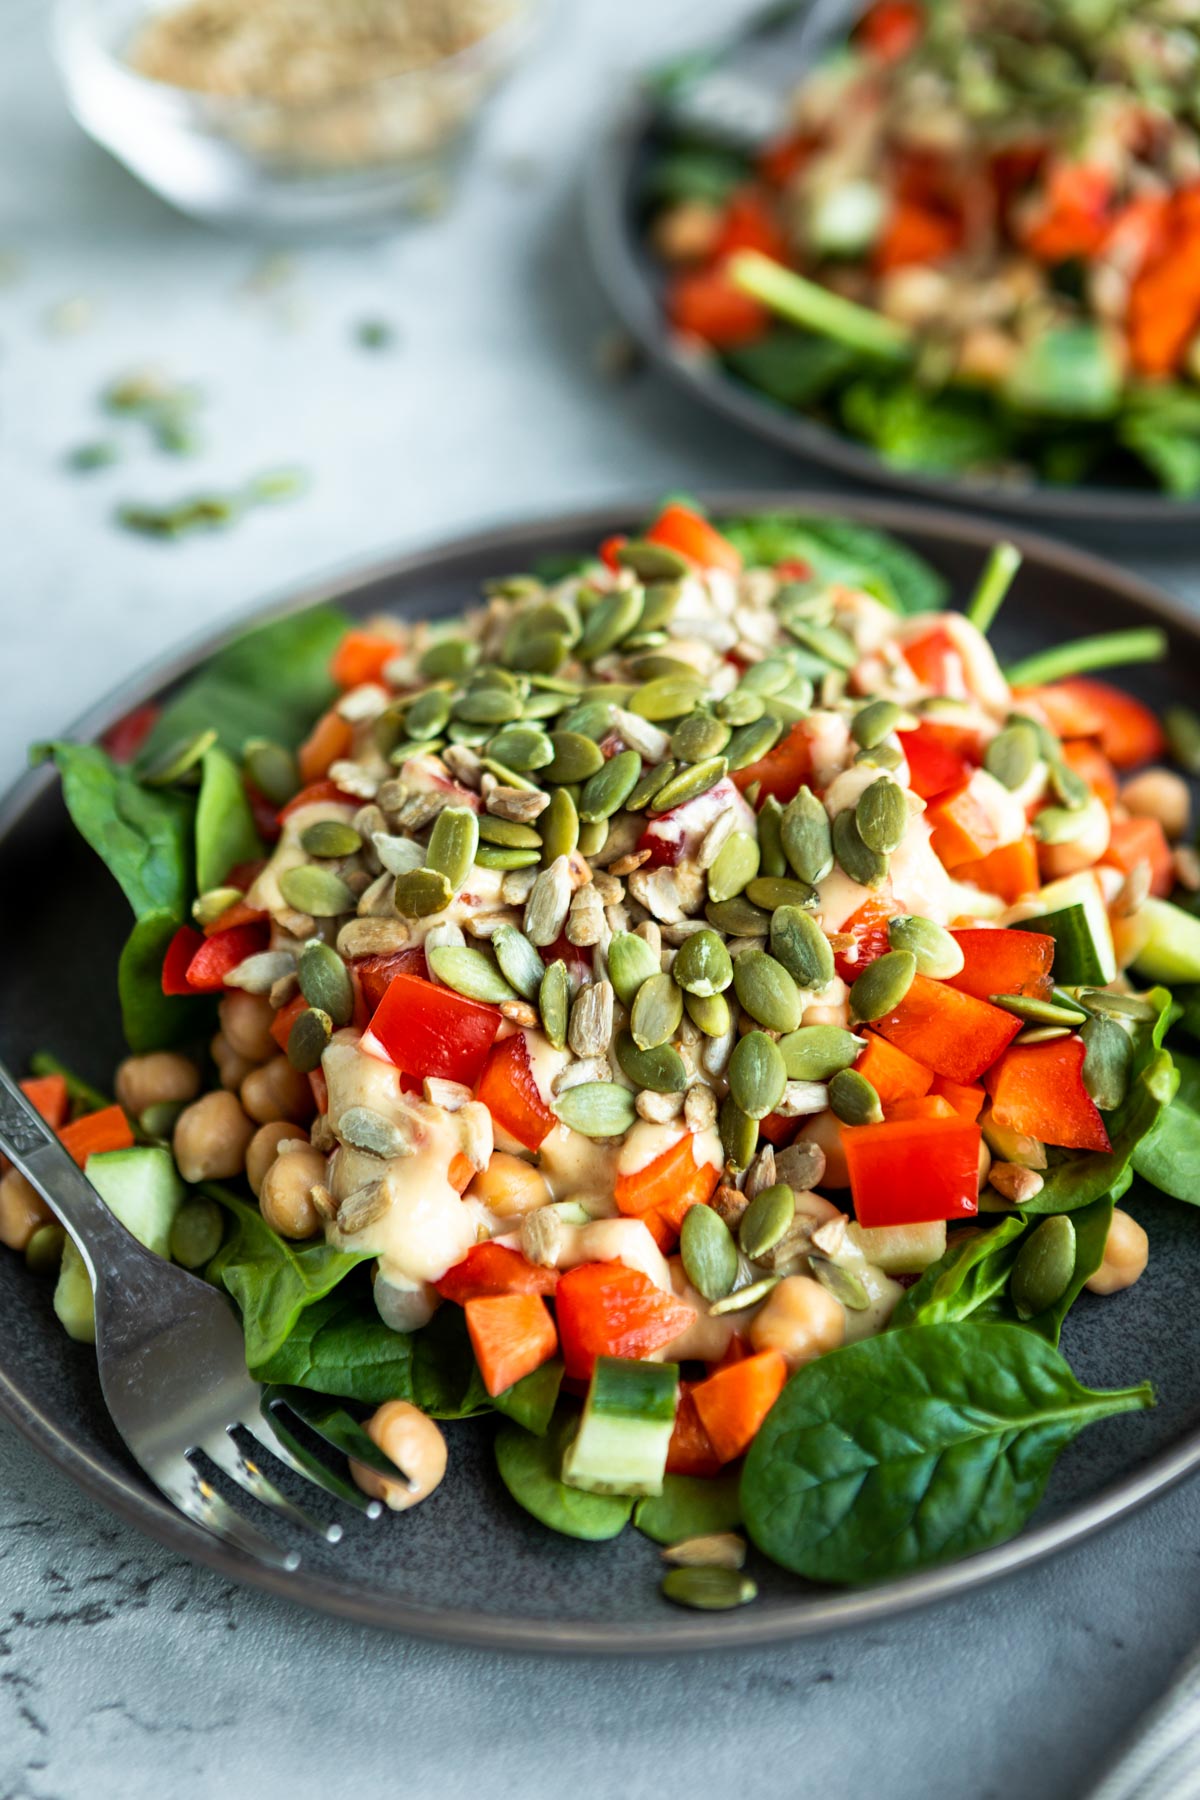 crunchy chickpea salad with spinach, chickpeas, pepitas and vegetables.